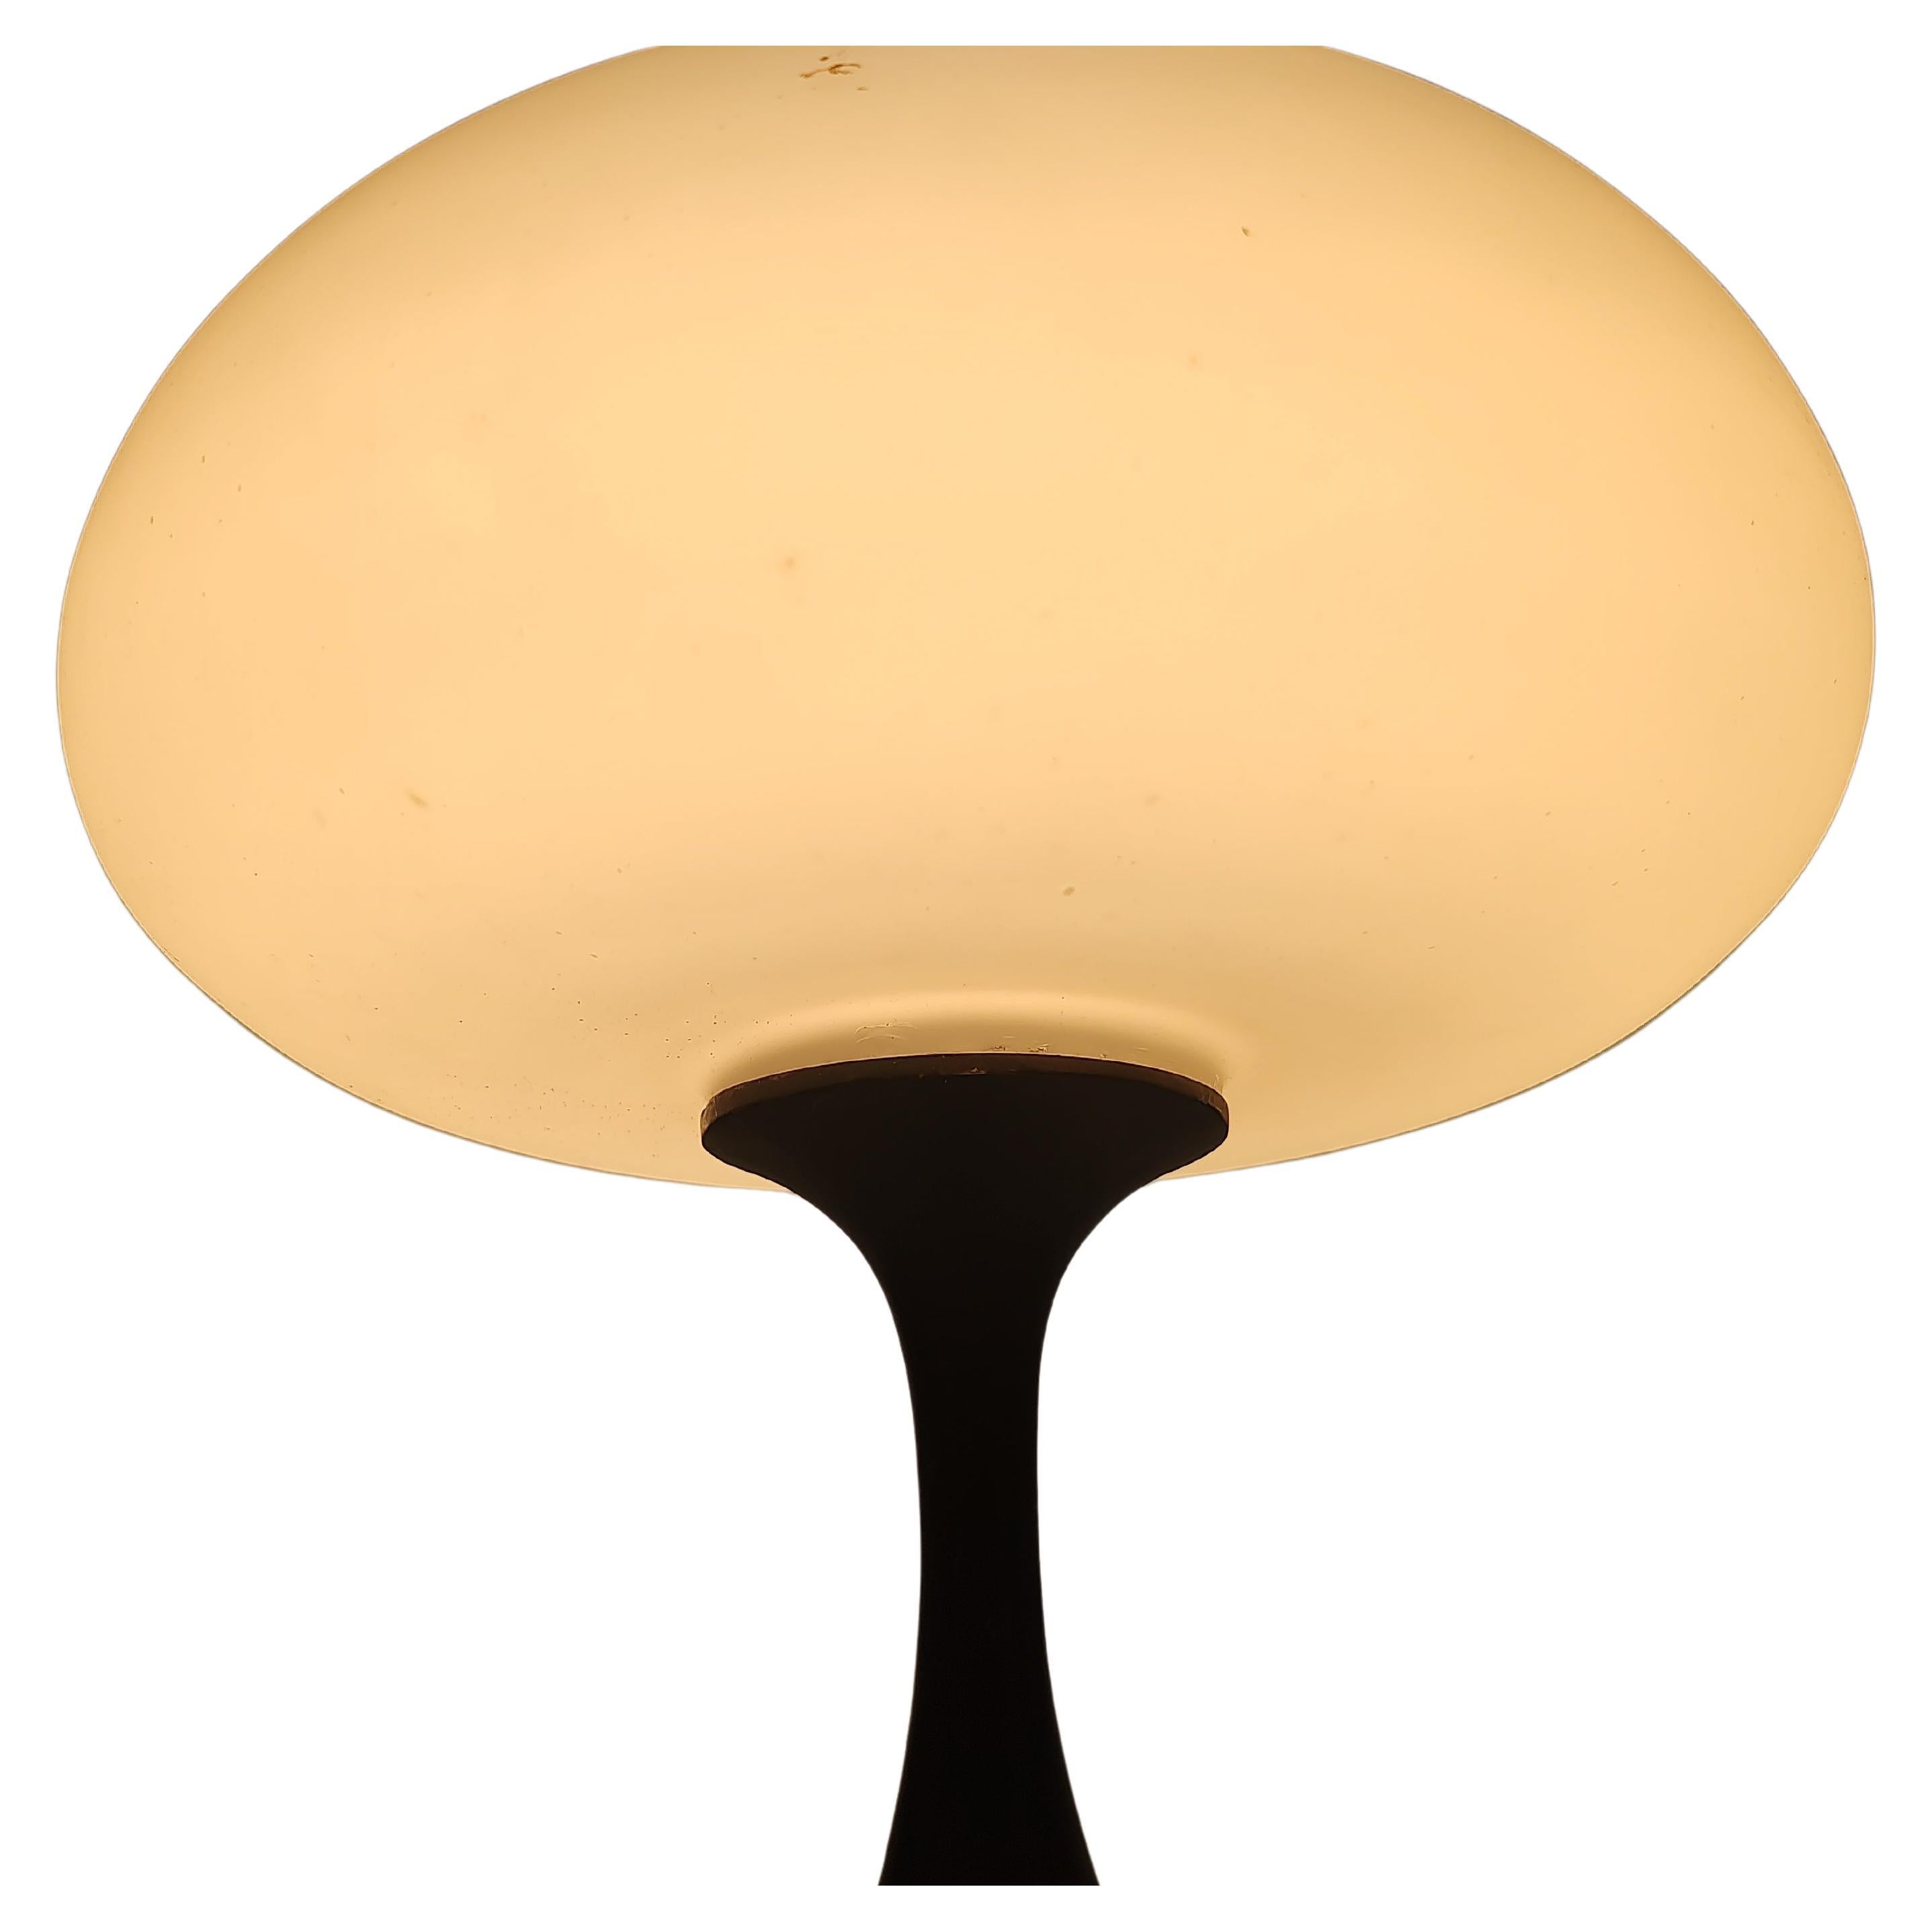 Painted Mid Century Modern Sculptural Mushroom Table Lamp Attributed to Laurel Lamp Co.